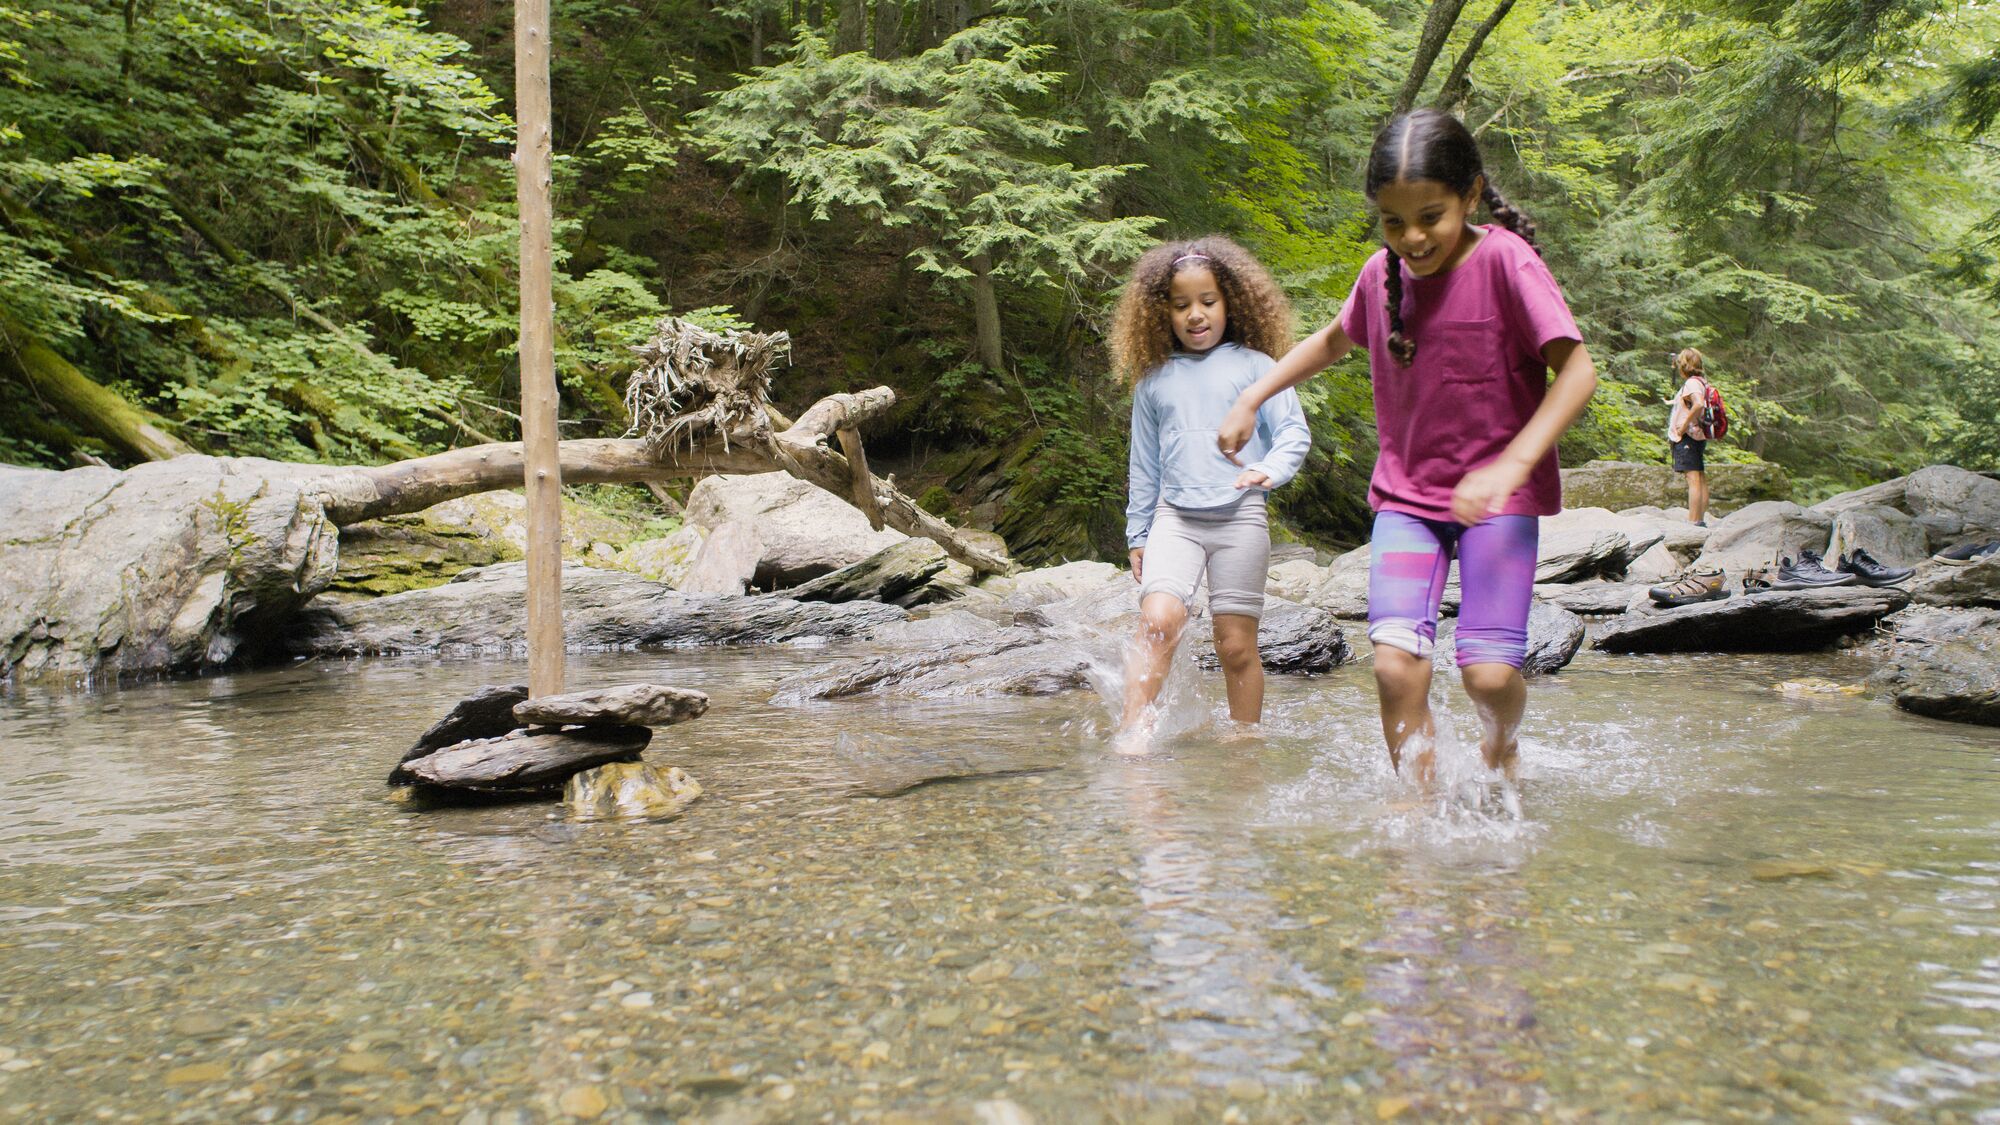 Two children run through a shallow stream in the woods on a warm day.